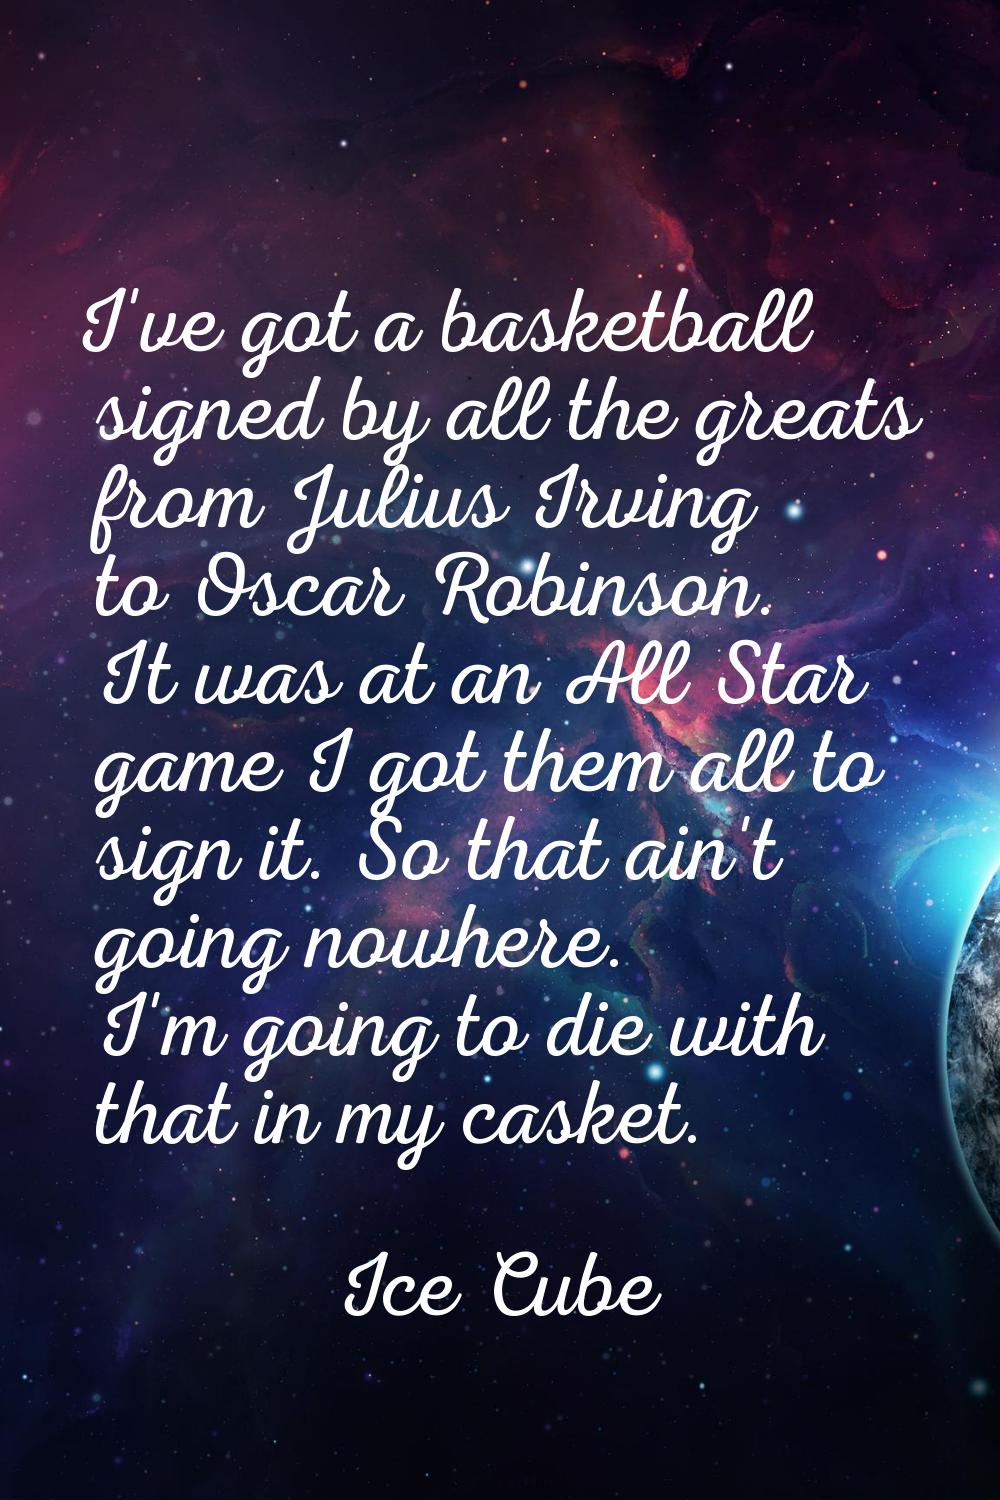 I've got a basketball signed by all the greats from Julius Irving to Oscar Robinson. It was at an A